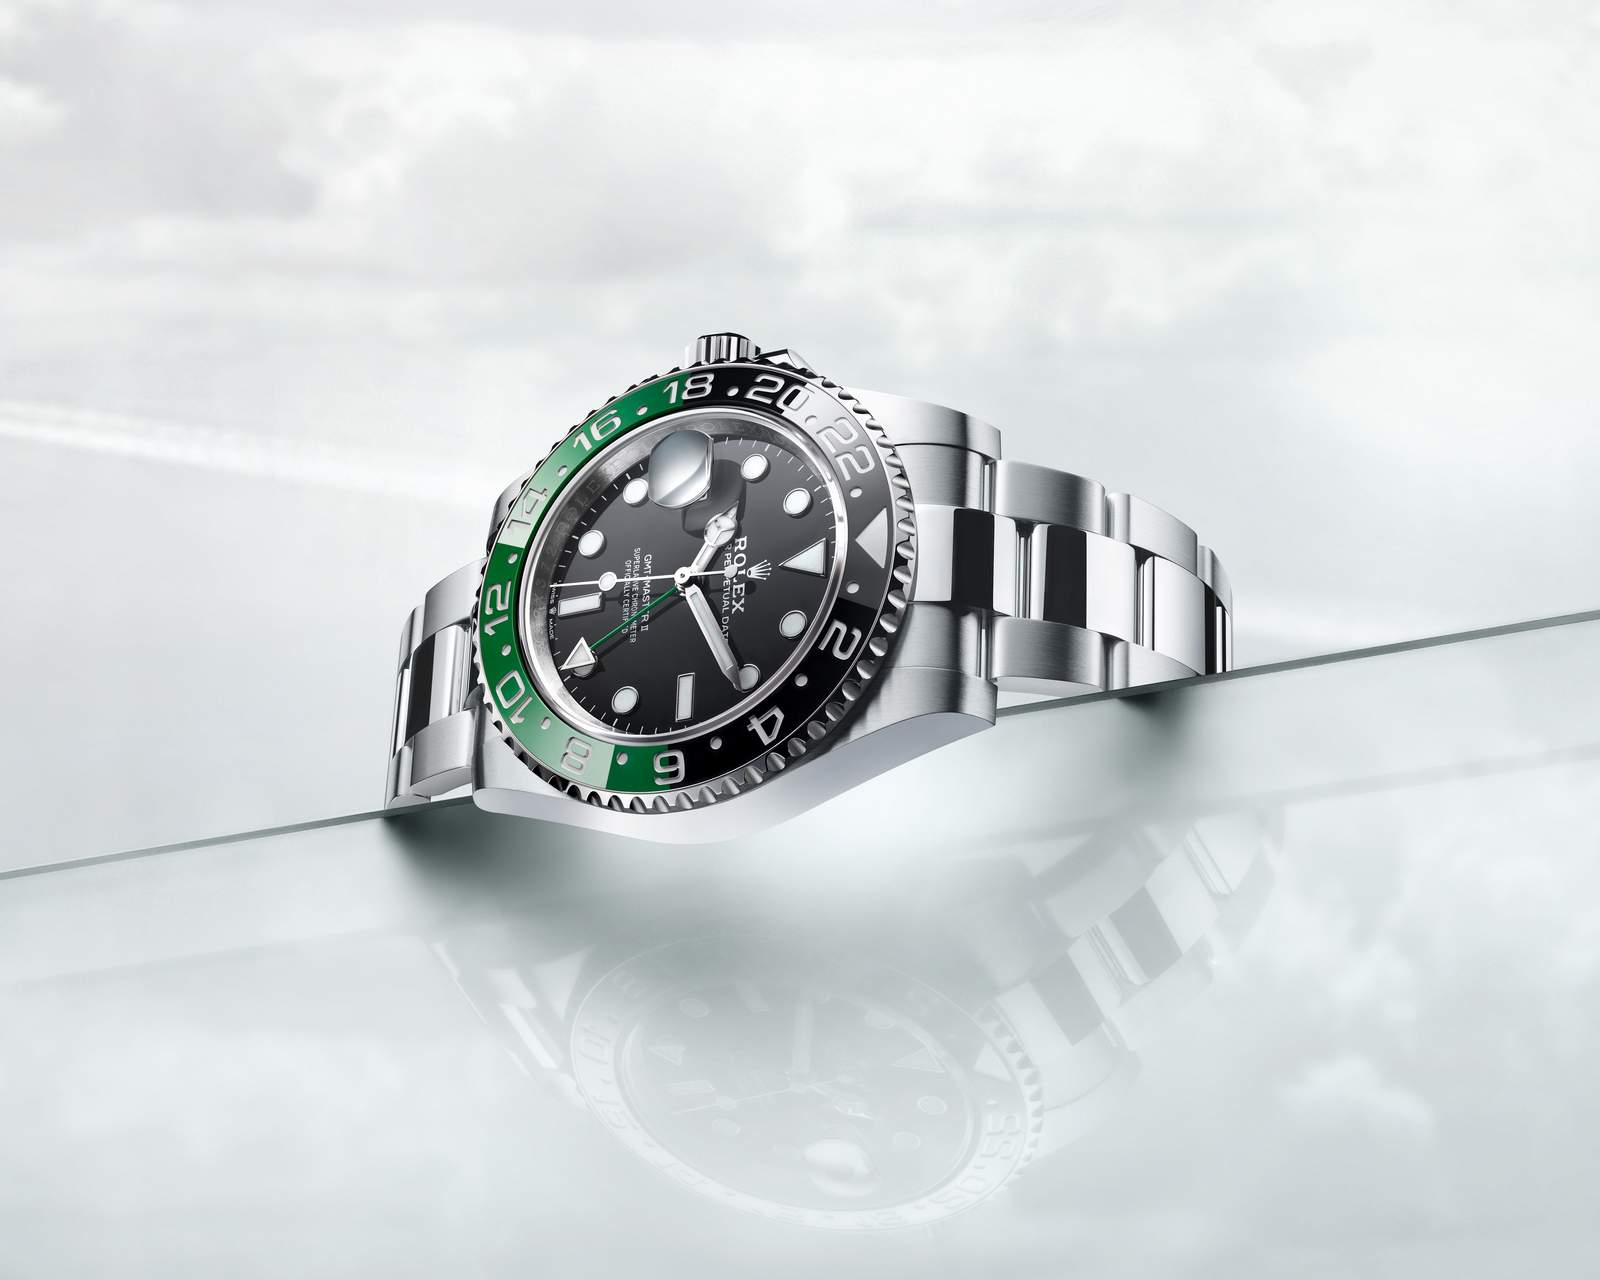 Rolex has debuted a new GMTMaster II with a lefthanded layout and a